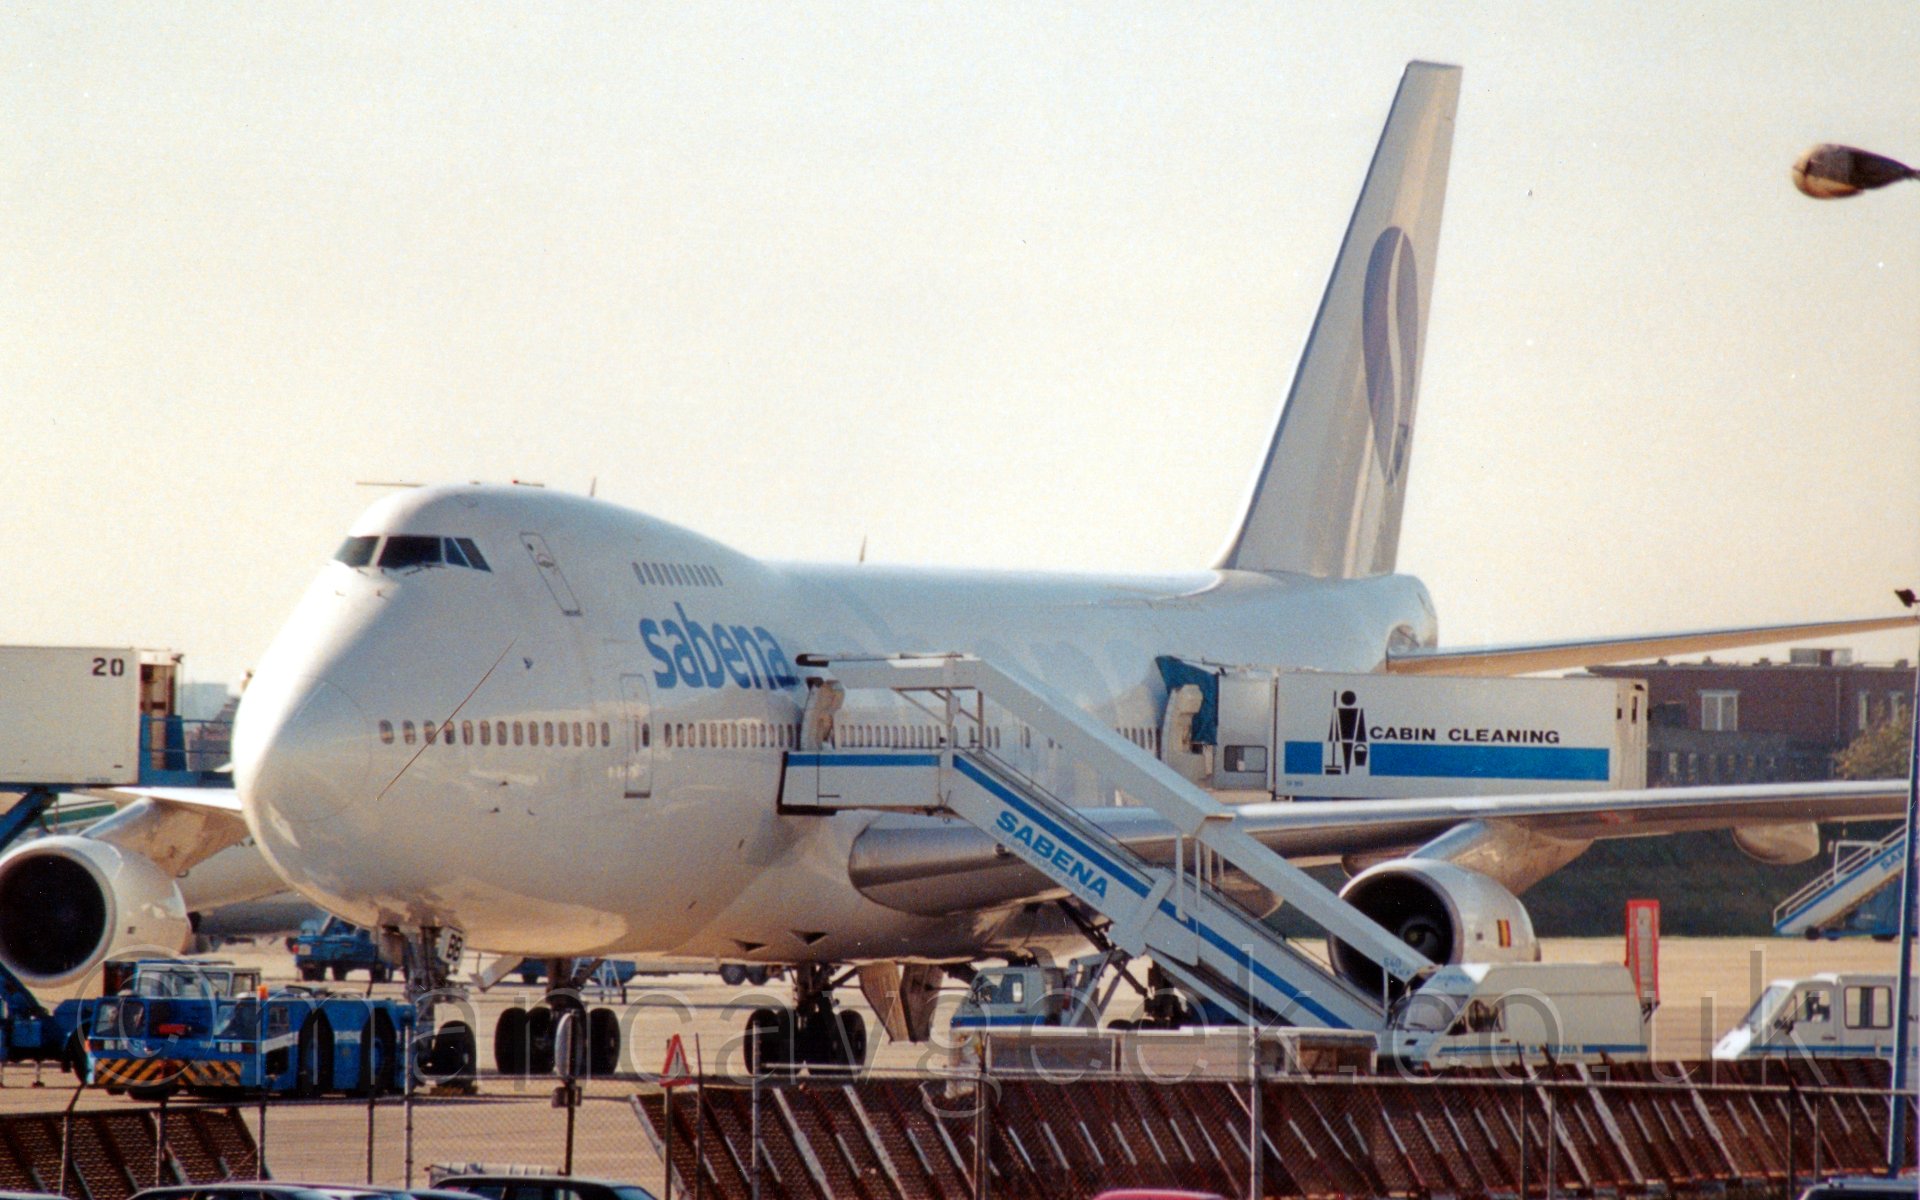 Front view of a very large 4 engined jet airliner parked facing slightly to the left of the camera. the plane is mostly white, with light blue "Sabena" titles on the upper forward fuselage, and larger, much paler blue "Sabena" titles along the whole length of the body. There is a set of mobile airstairs mounted on the back of a truck attached to a lower deck door just forward of the wing, while a cabin cleaning truck is attached to a door just aft of the wing. There are various other vehicles scattered around the plane, including a blue tug attaching itself to the nosewheel. Above it all, the sky is just a mass of hazy cloud.